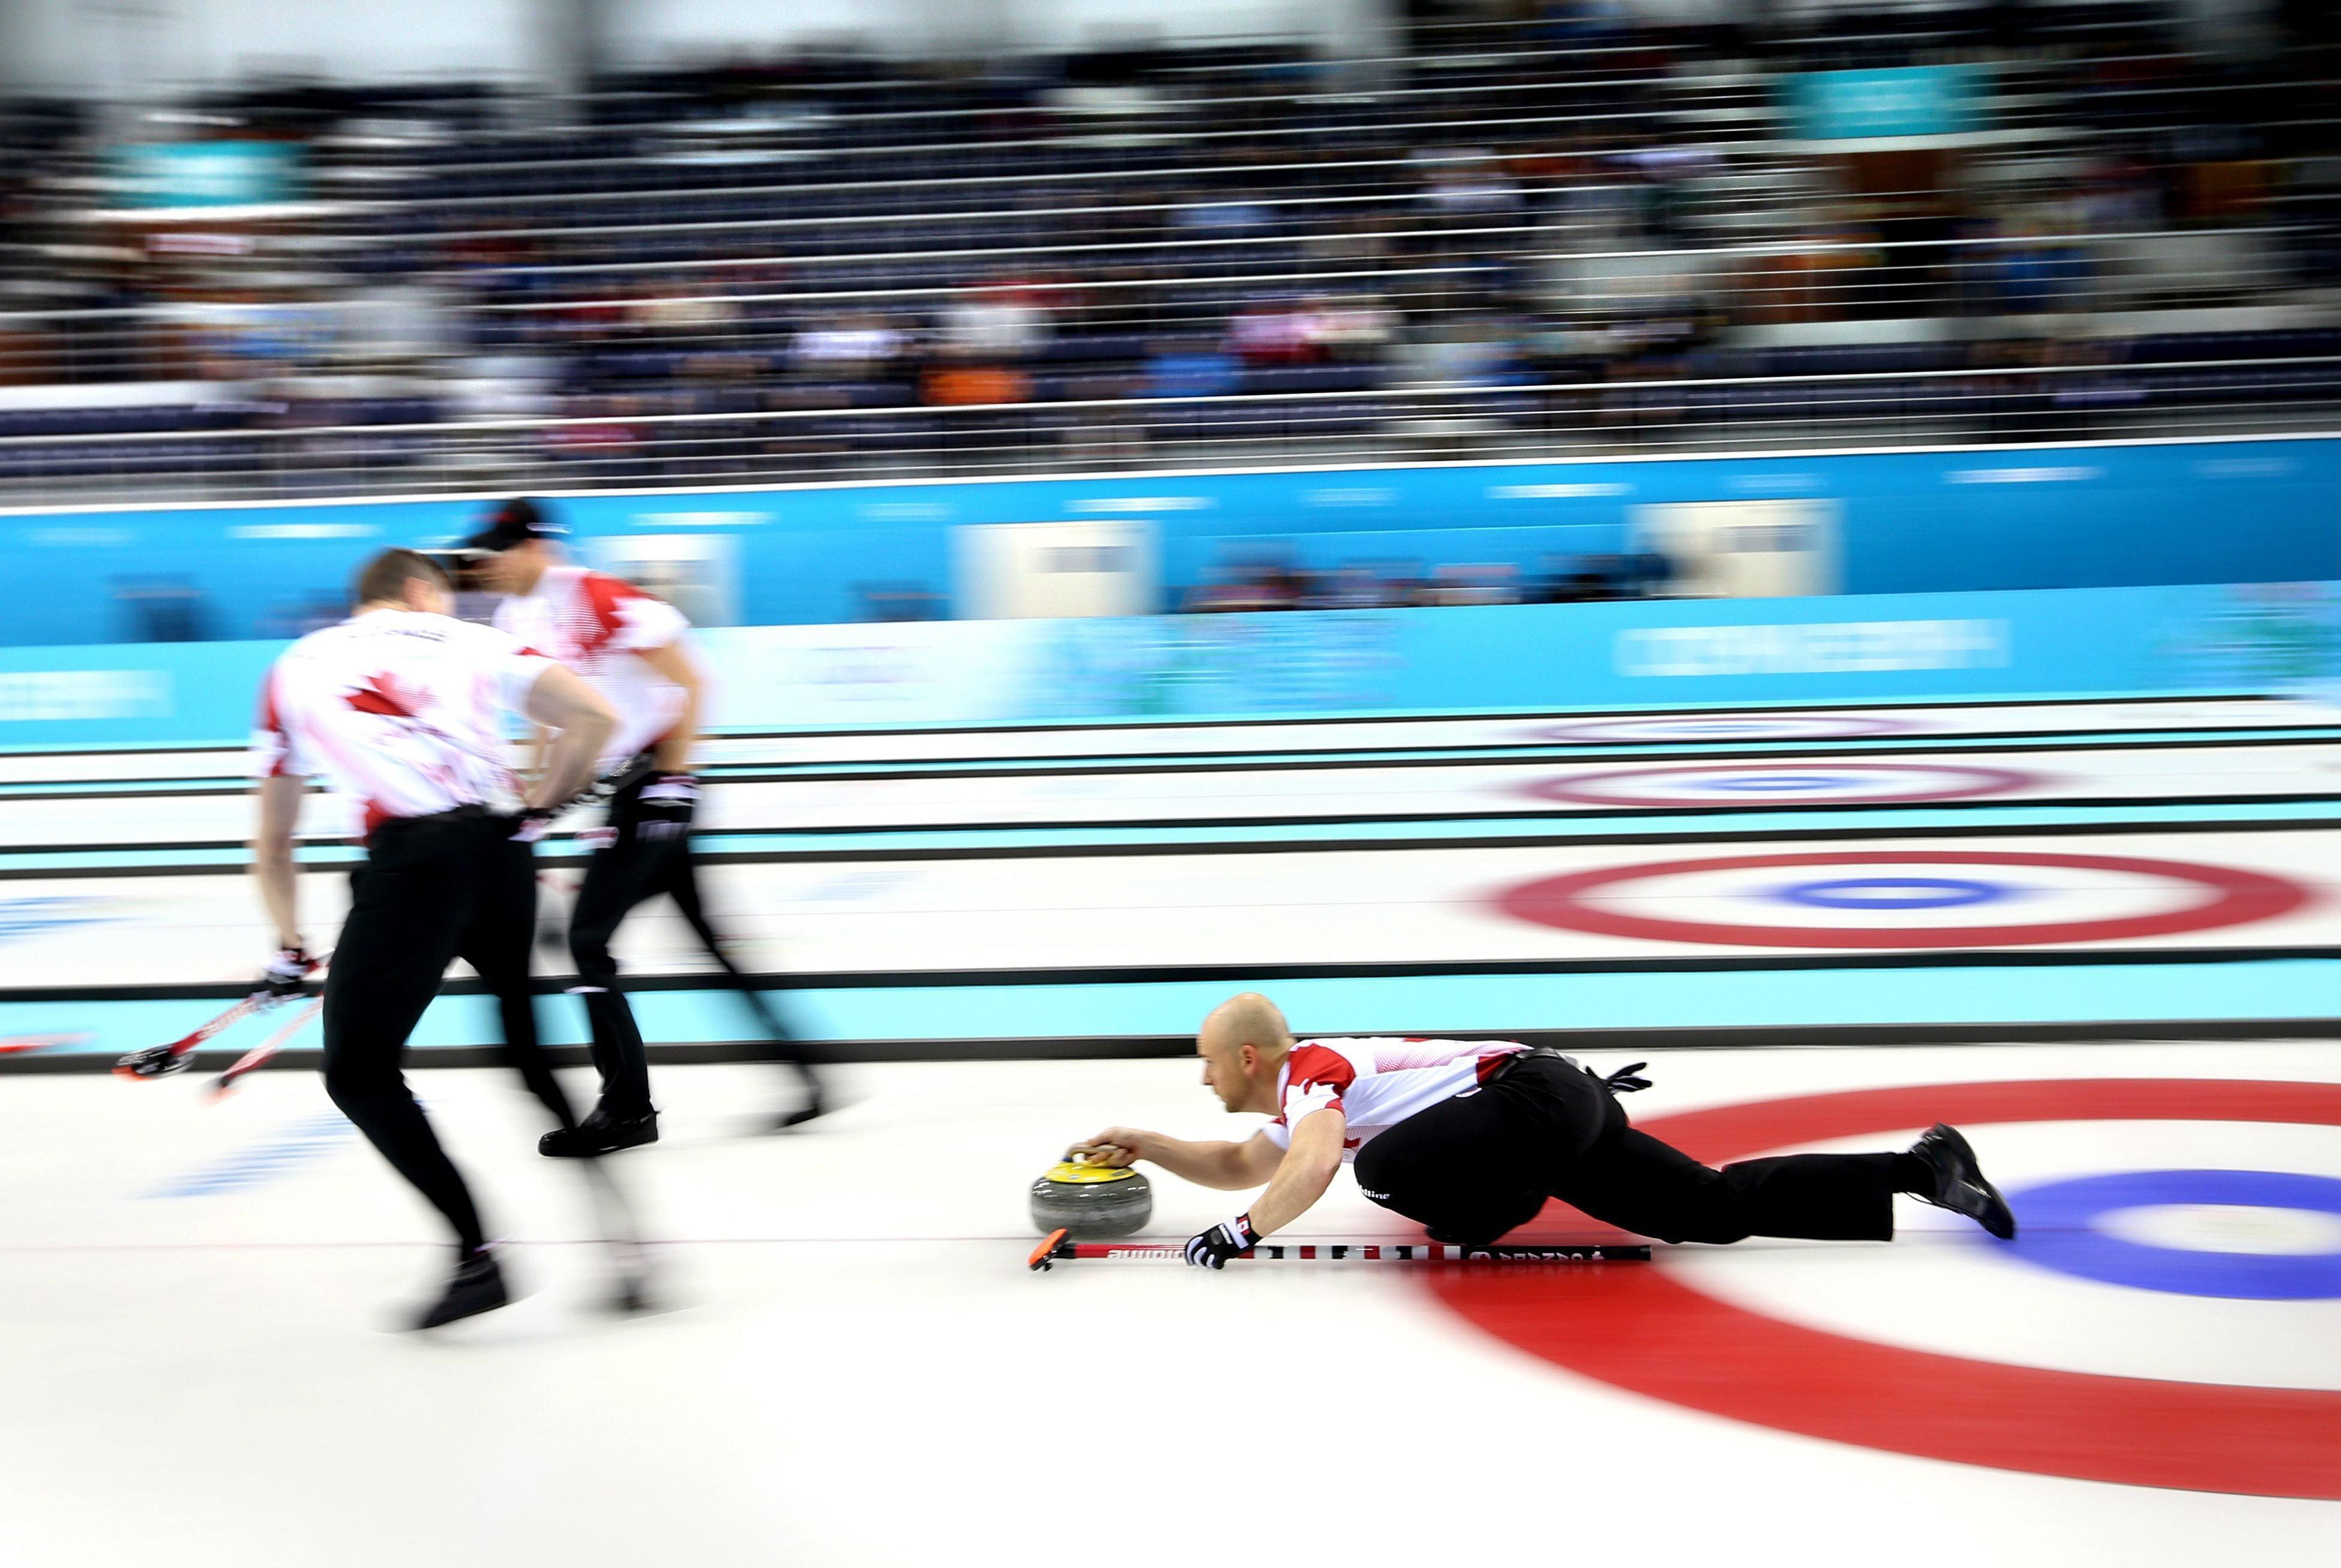 Curling competition at the Olympic Games in Sochi wallpaper